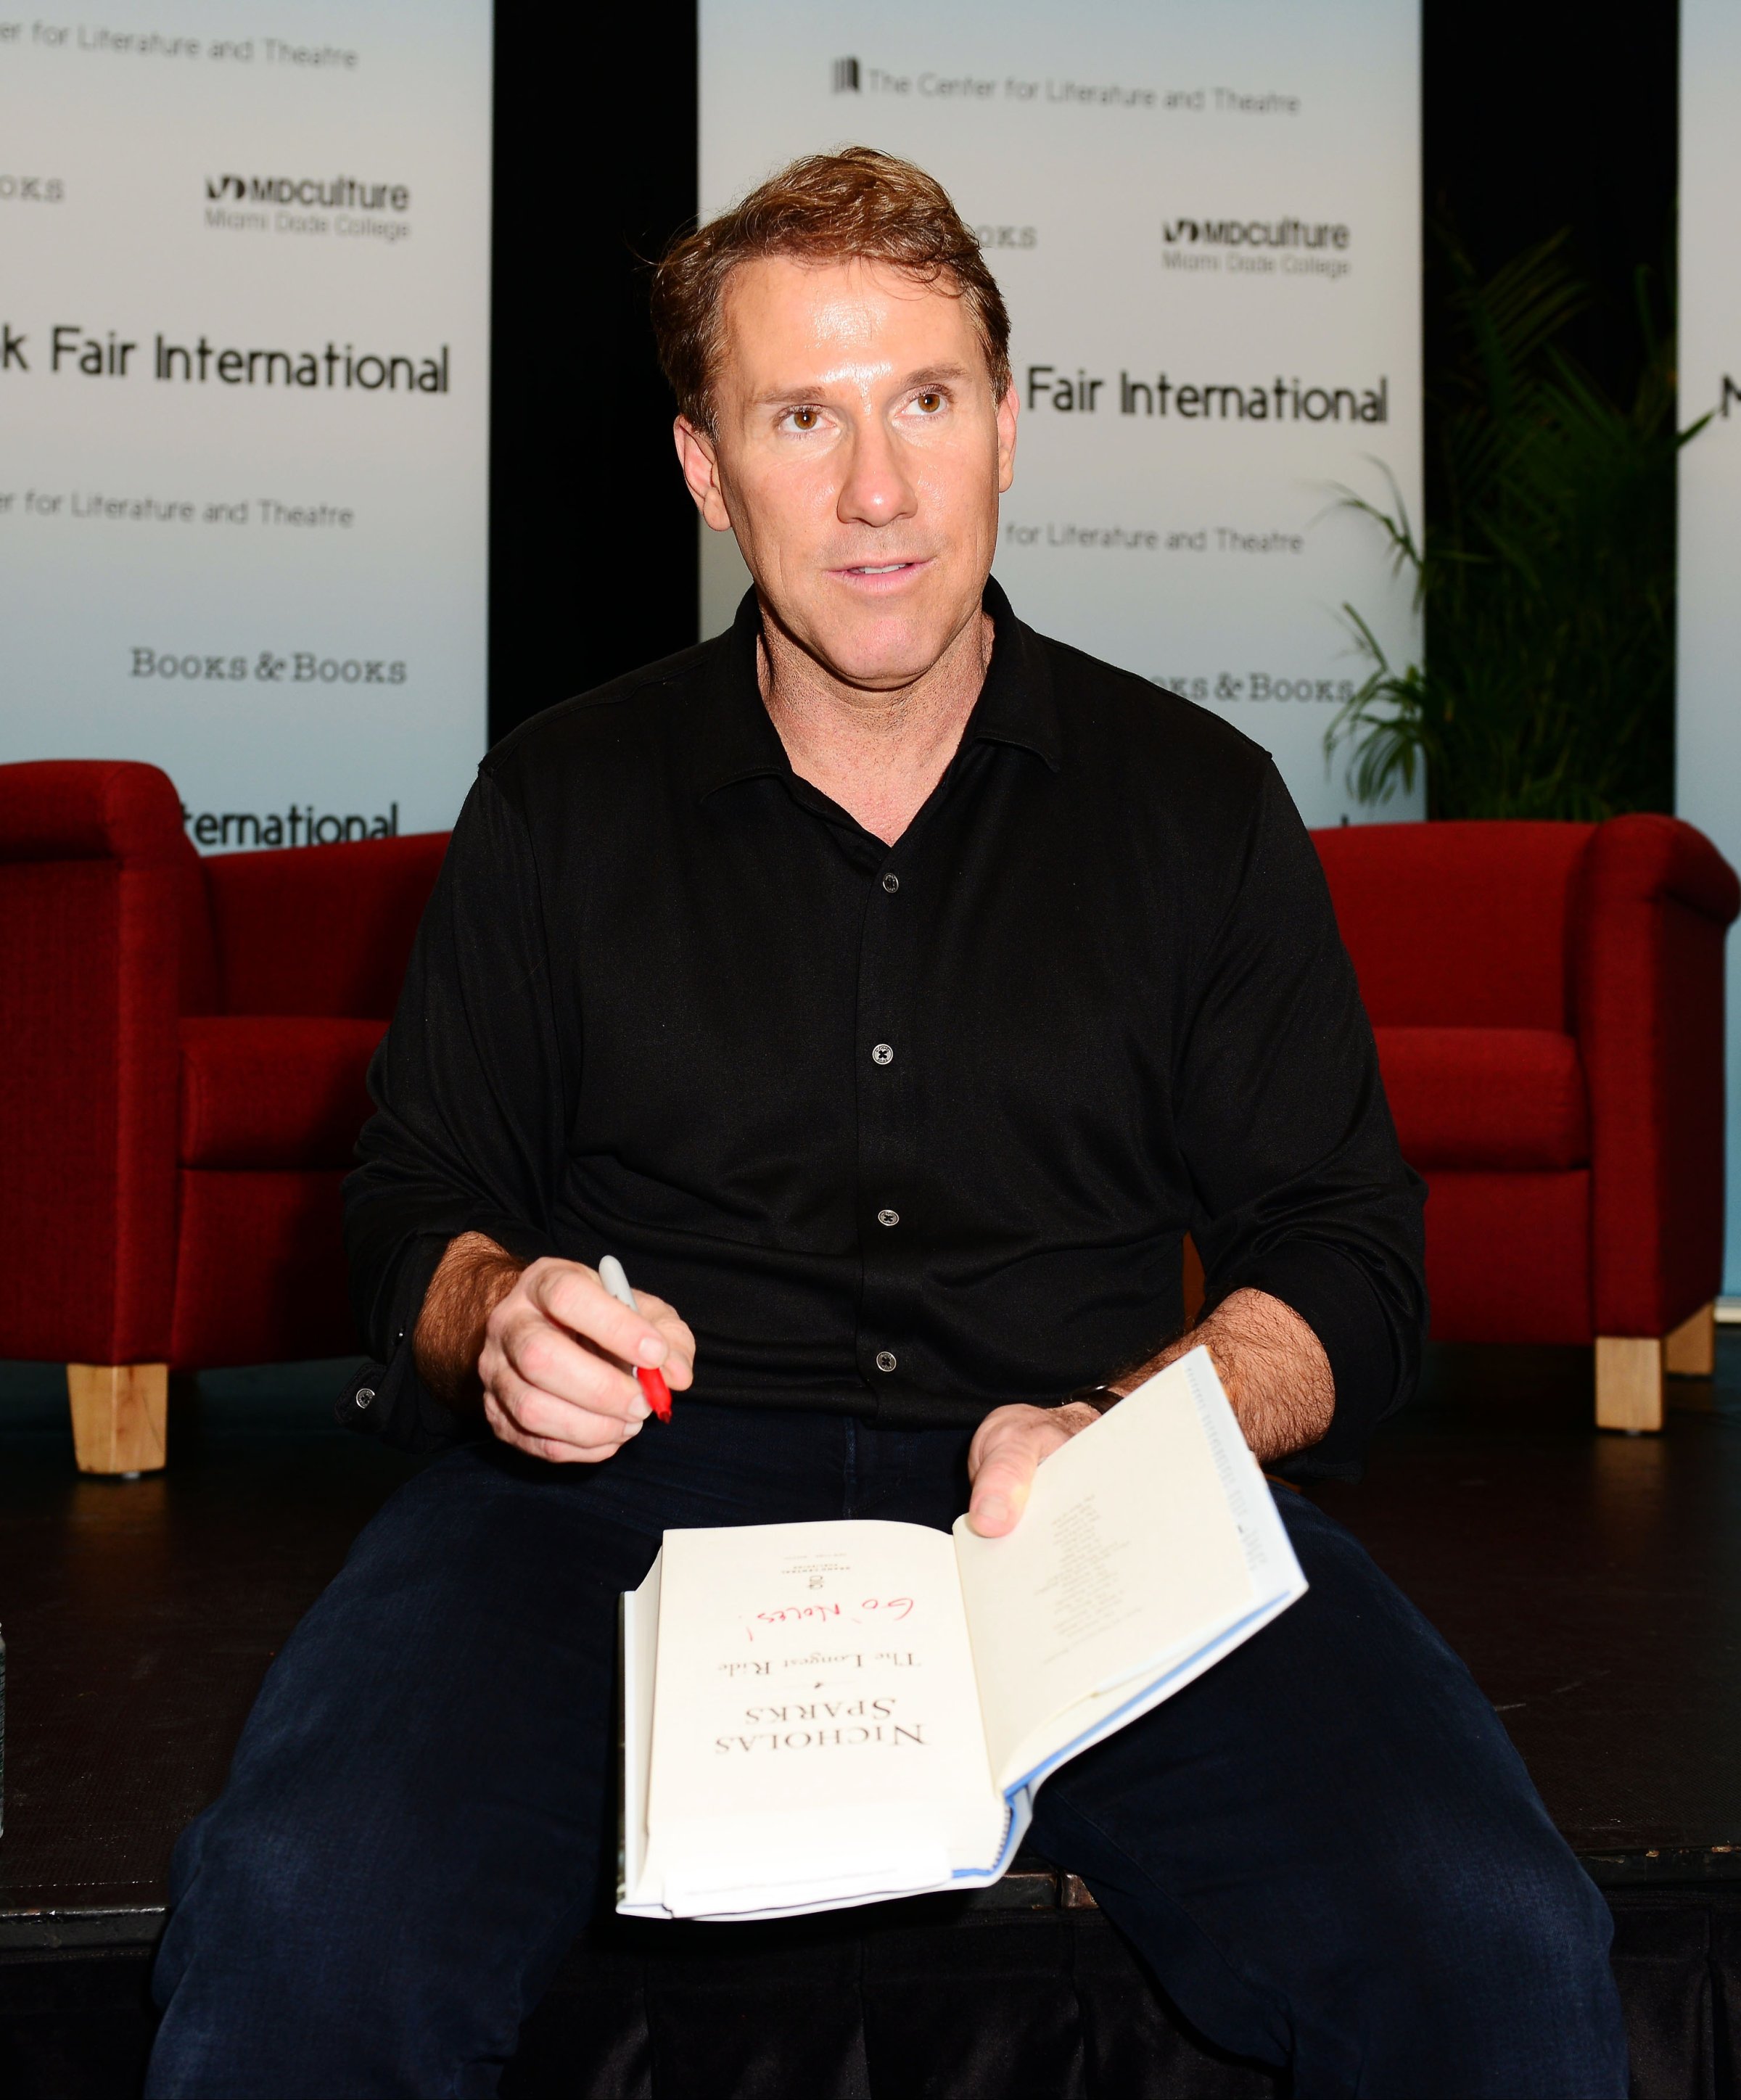 Author Nicholas Sparks discusses his book "The Longest Ride" presented by Books and Books at Chapman Conference Center at Miami Dade College on Sept. 30, 2013 in Miami.